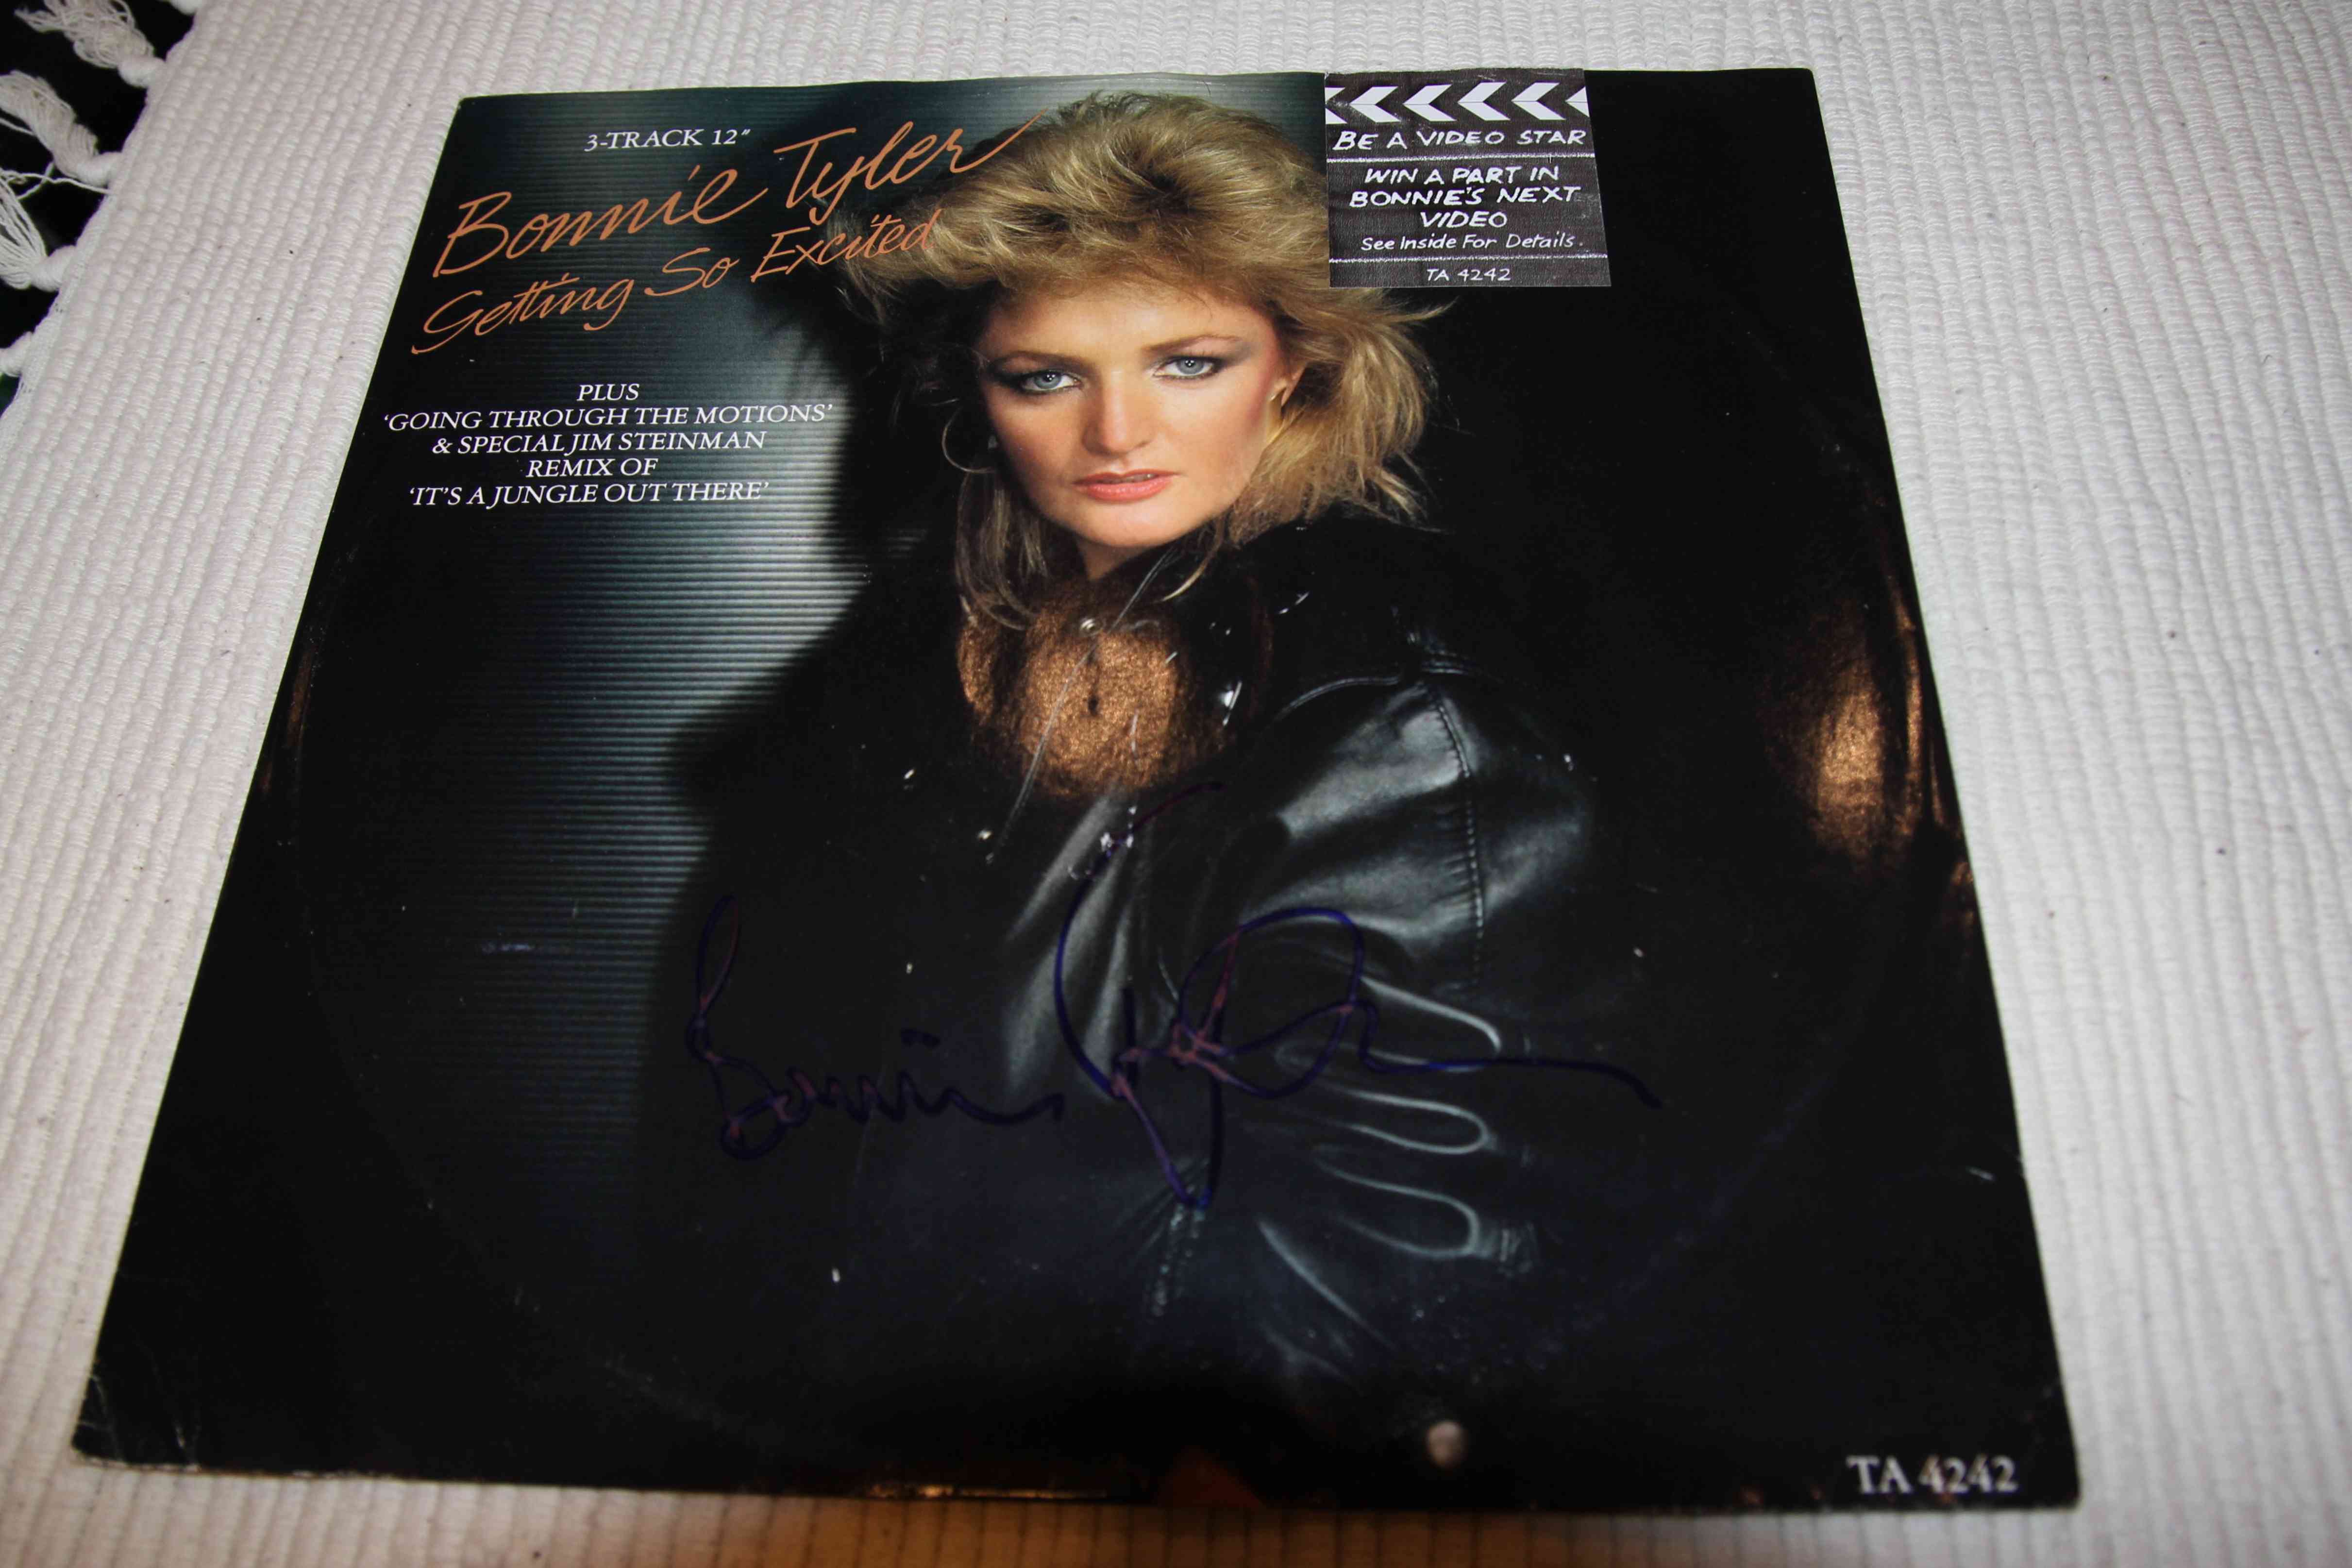 BONNIE TYLER - GETTING SO EXCITED - ORIGINAL SIGNED